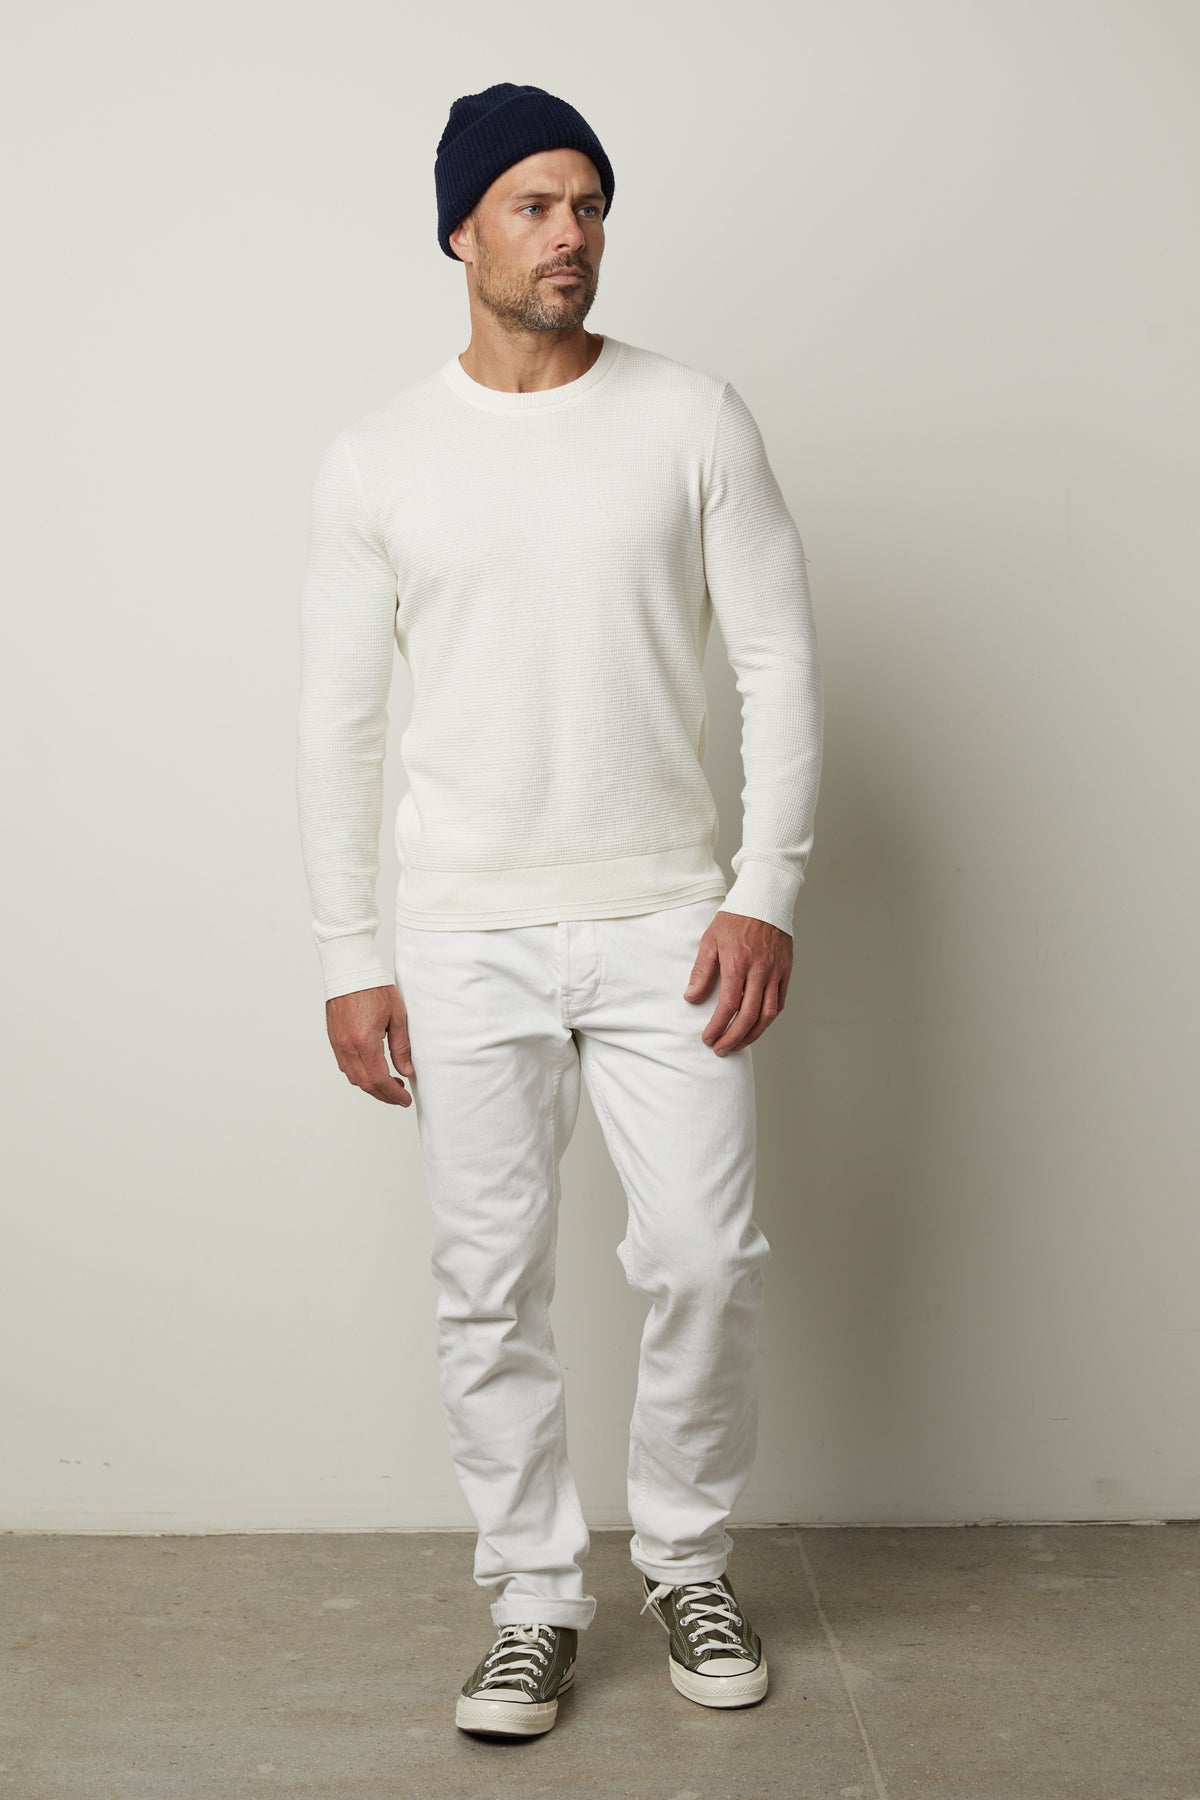   A man wearing a Velvet by Graham & Spencer WALTER CREW NECK SWEATER and jeans. 